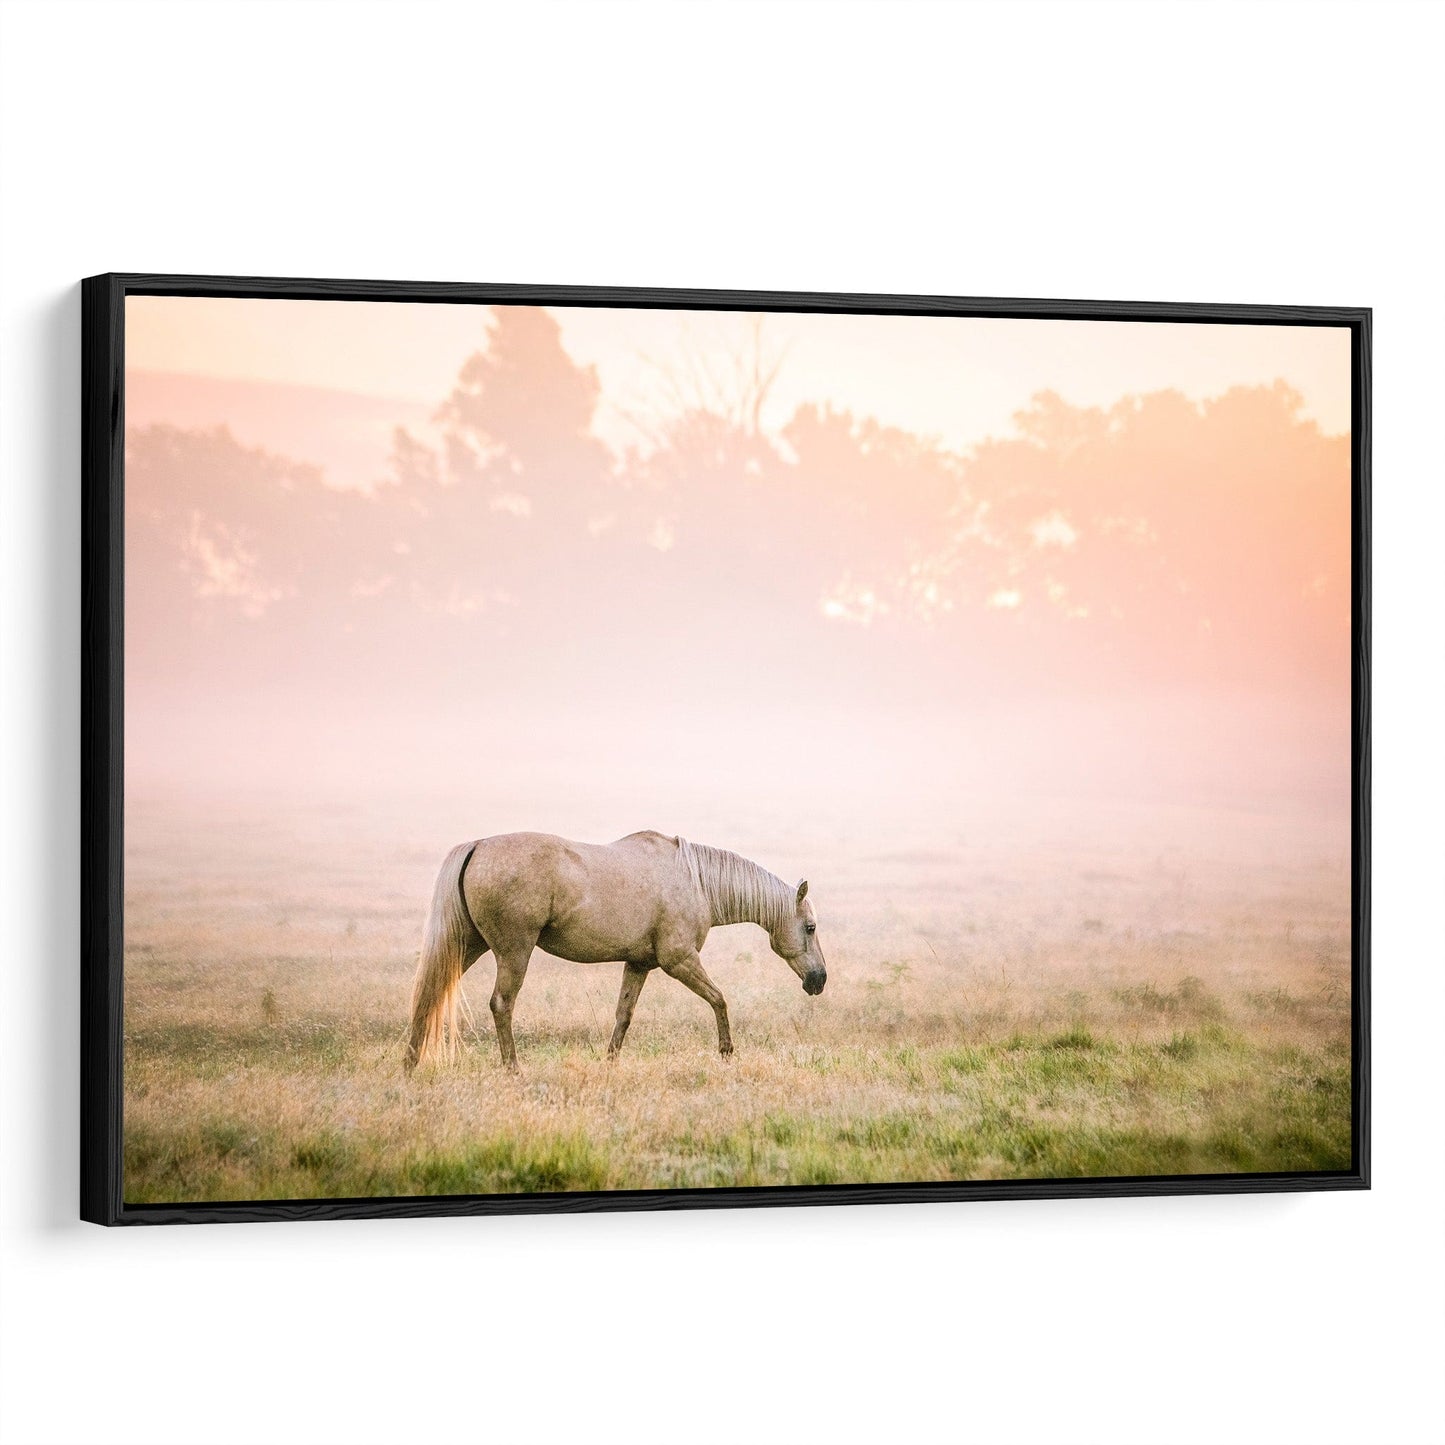 Palomino Horse Wall Art in Pastel Colors Canvas-Black Frame / 12 x 18 Inches Wall Art Teri James Photography